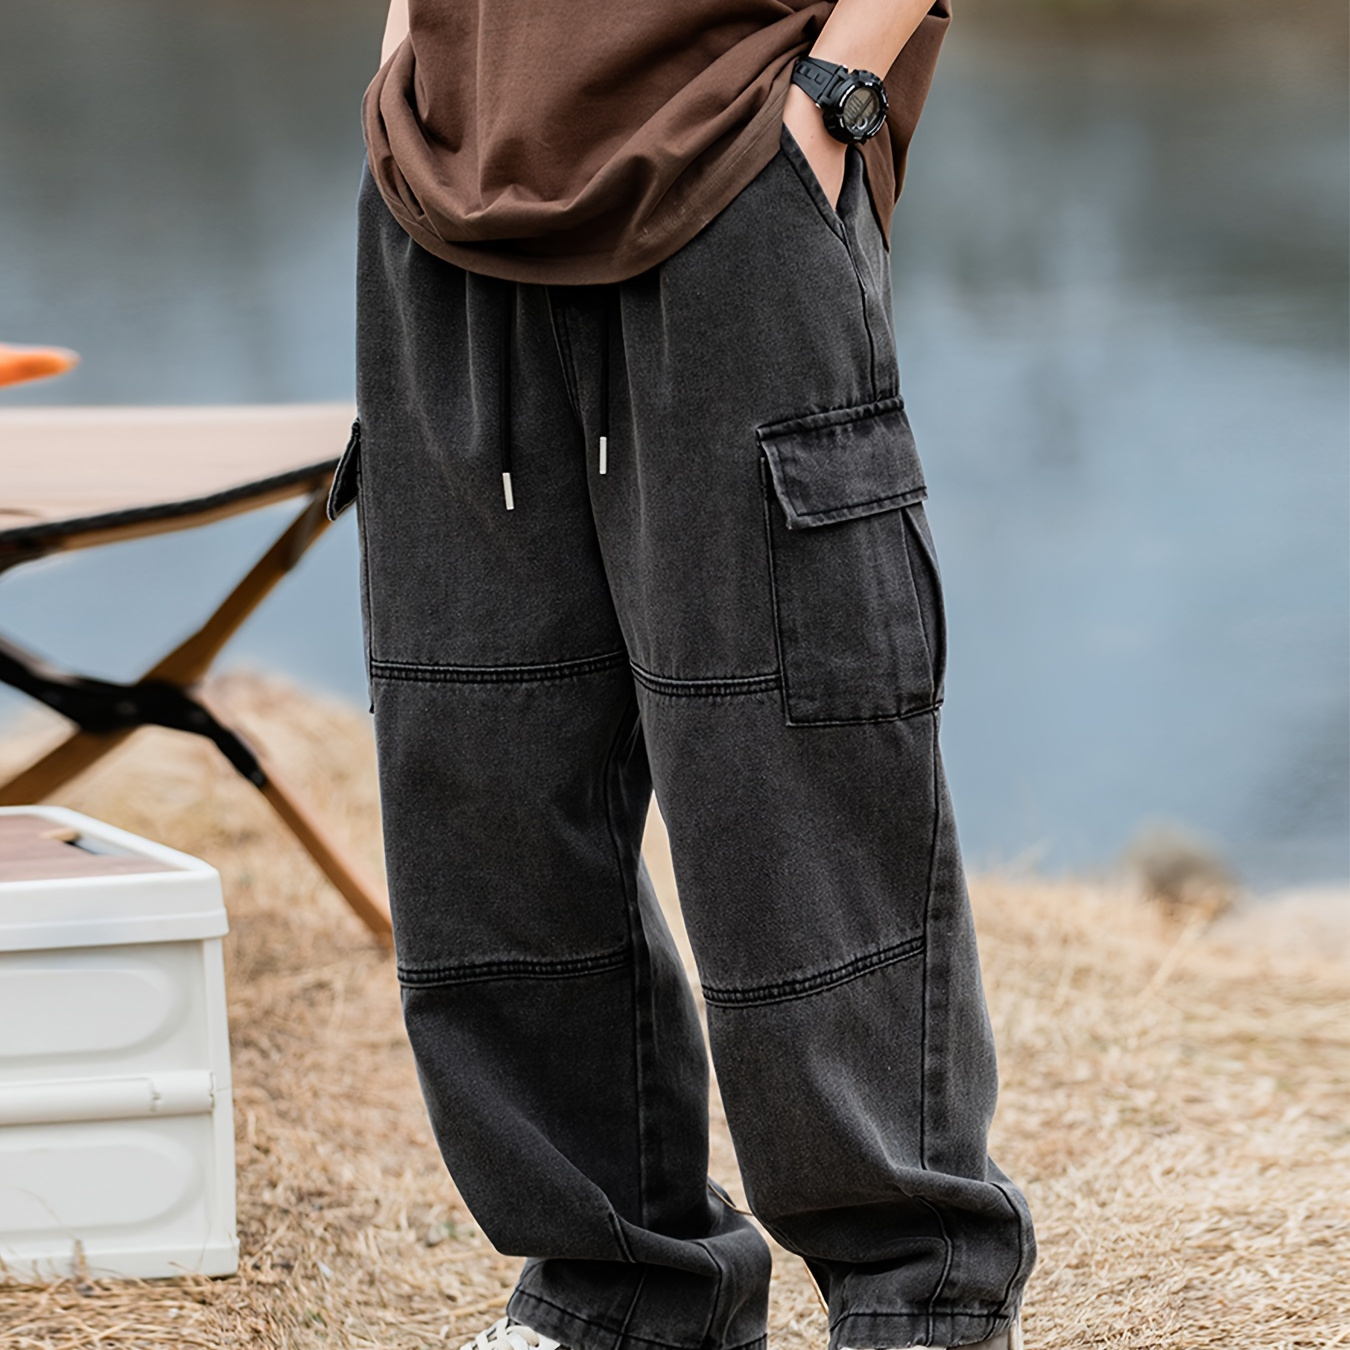 

Men's Solid Cargo Pants With Multi Pockets, Causal Drawstring Cotton Blend Trousers For Spring Fall Outdoor Activities